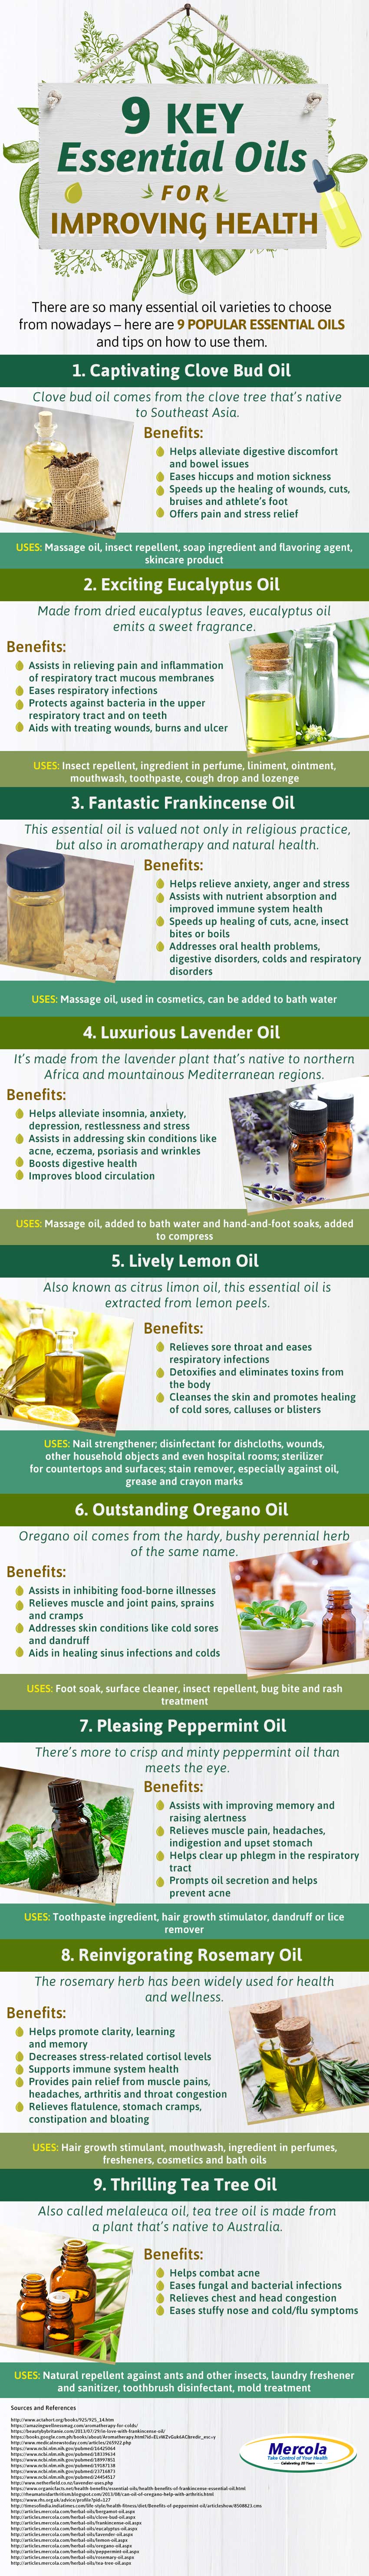 9 Key Essential Oils For Everyday Use Infographic